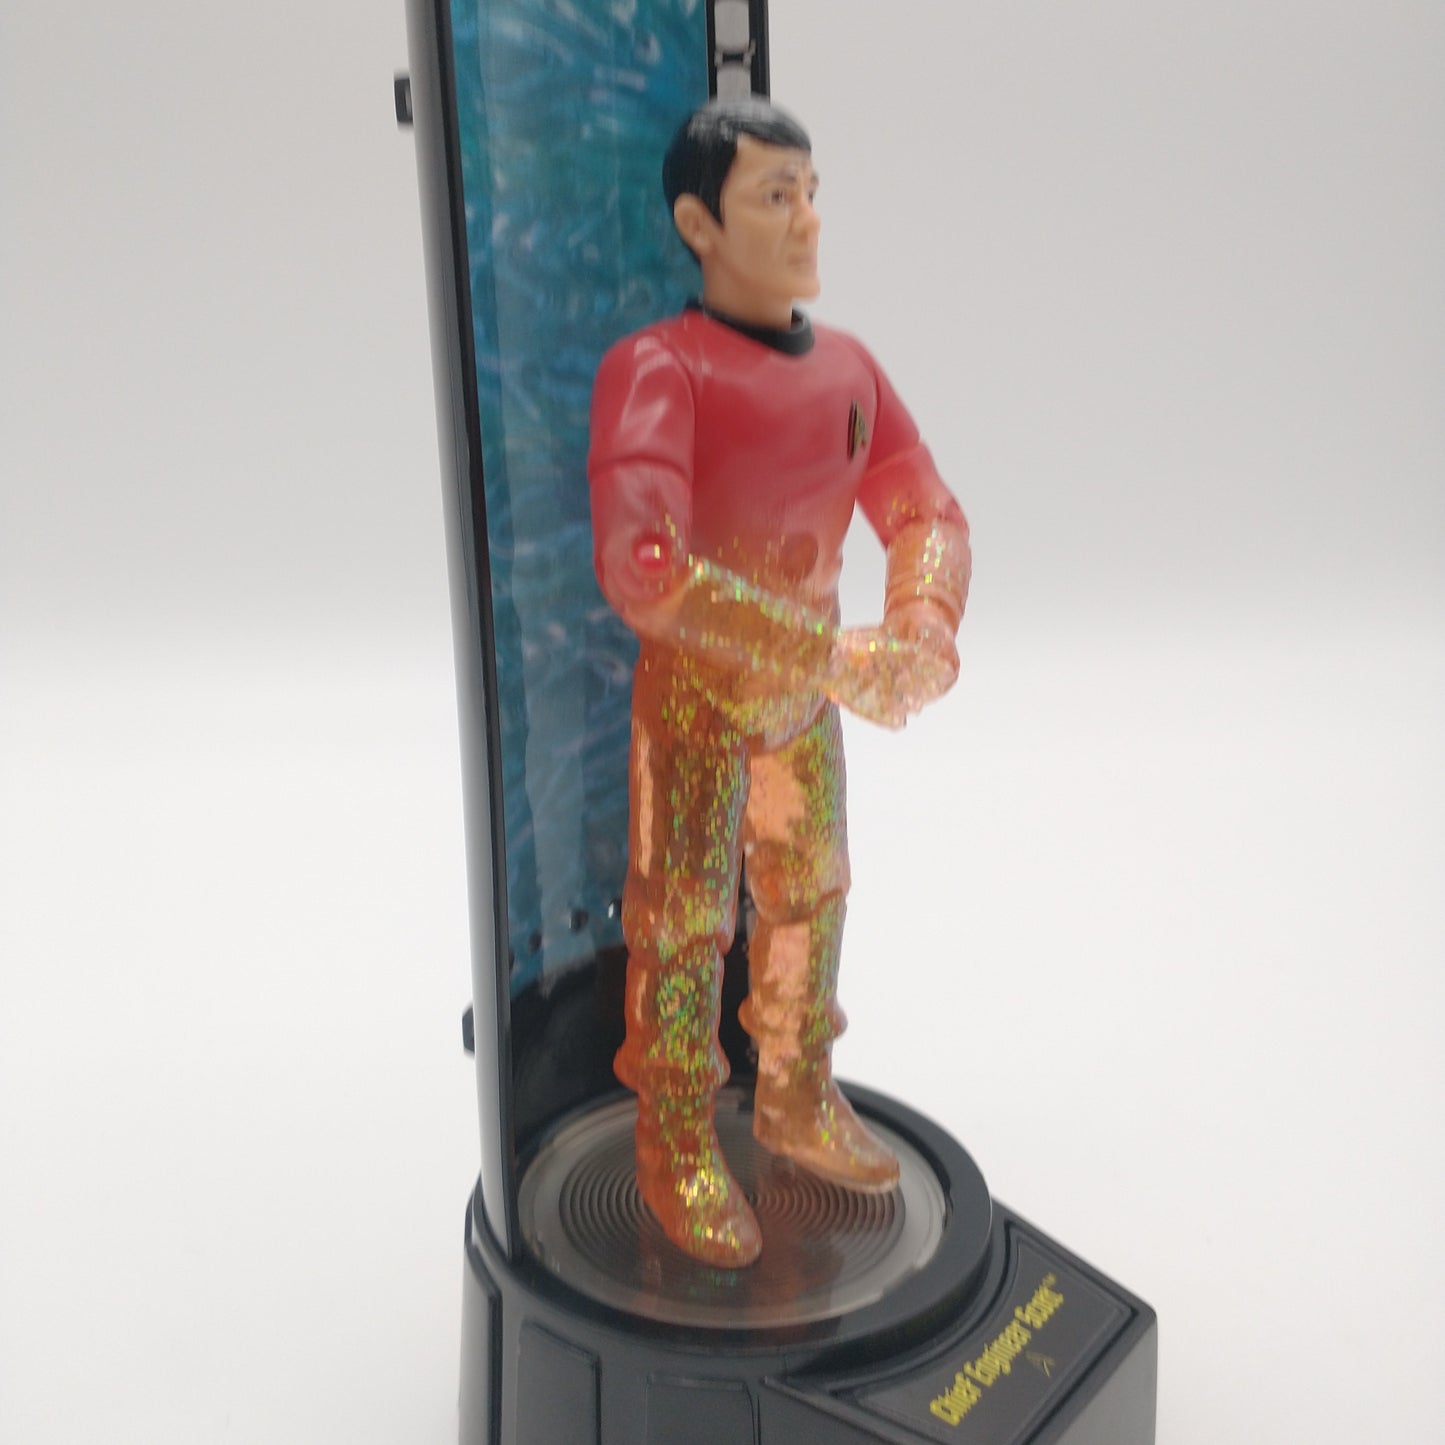  The action figure from the left side